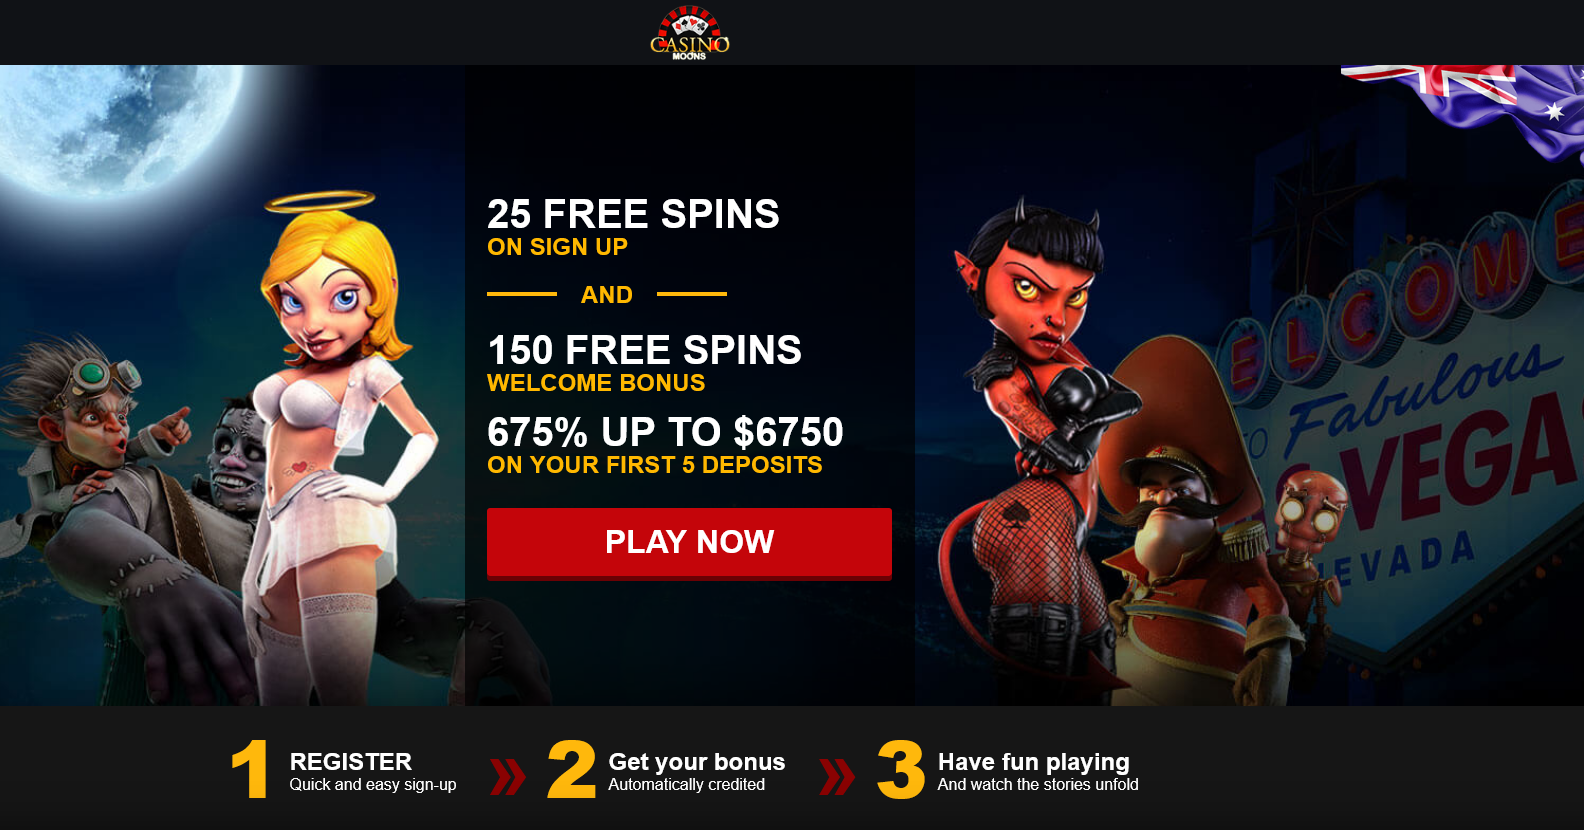 25 FREE SPINS ON SIGN UP AND 150 FREE SPINS WELCOME BONUS  675% UP TO $6750 ON YOUR FIRST 5 DEPOSITS